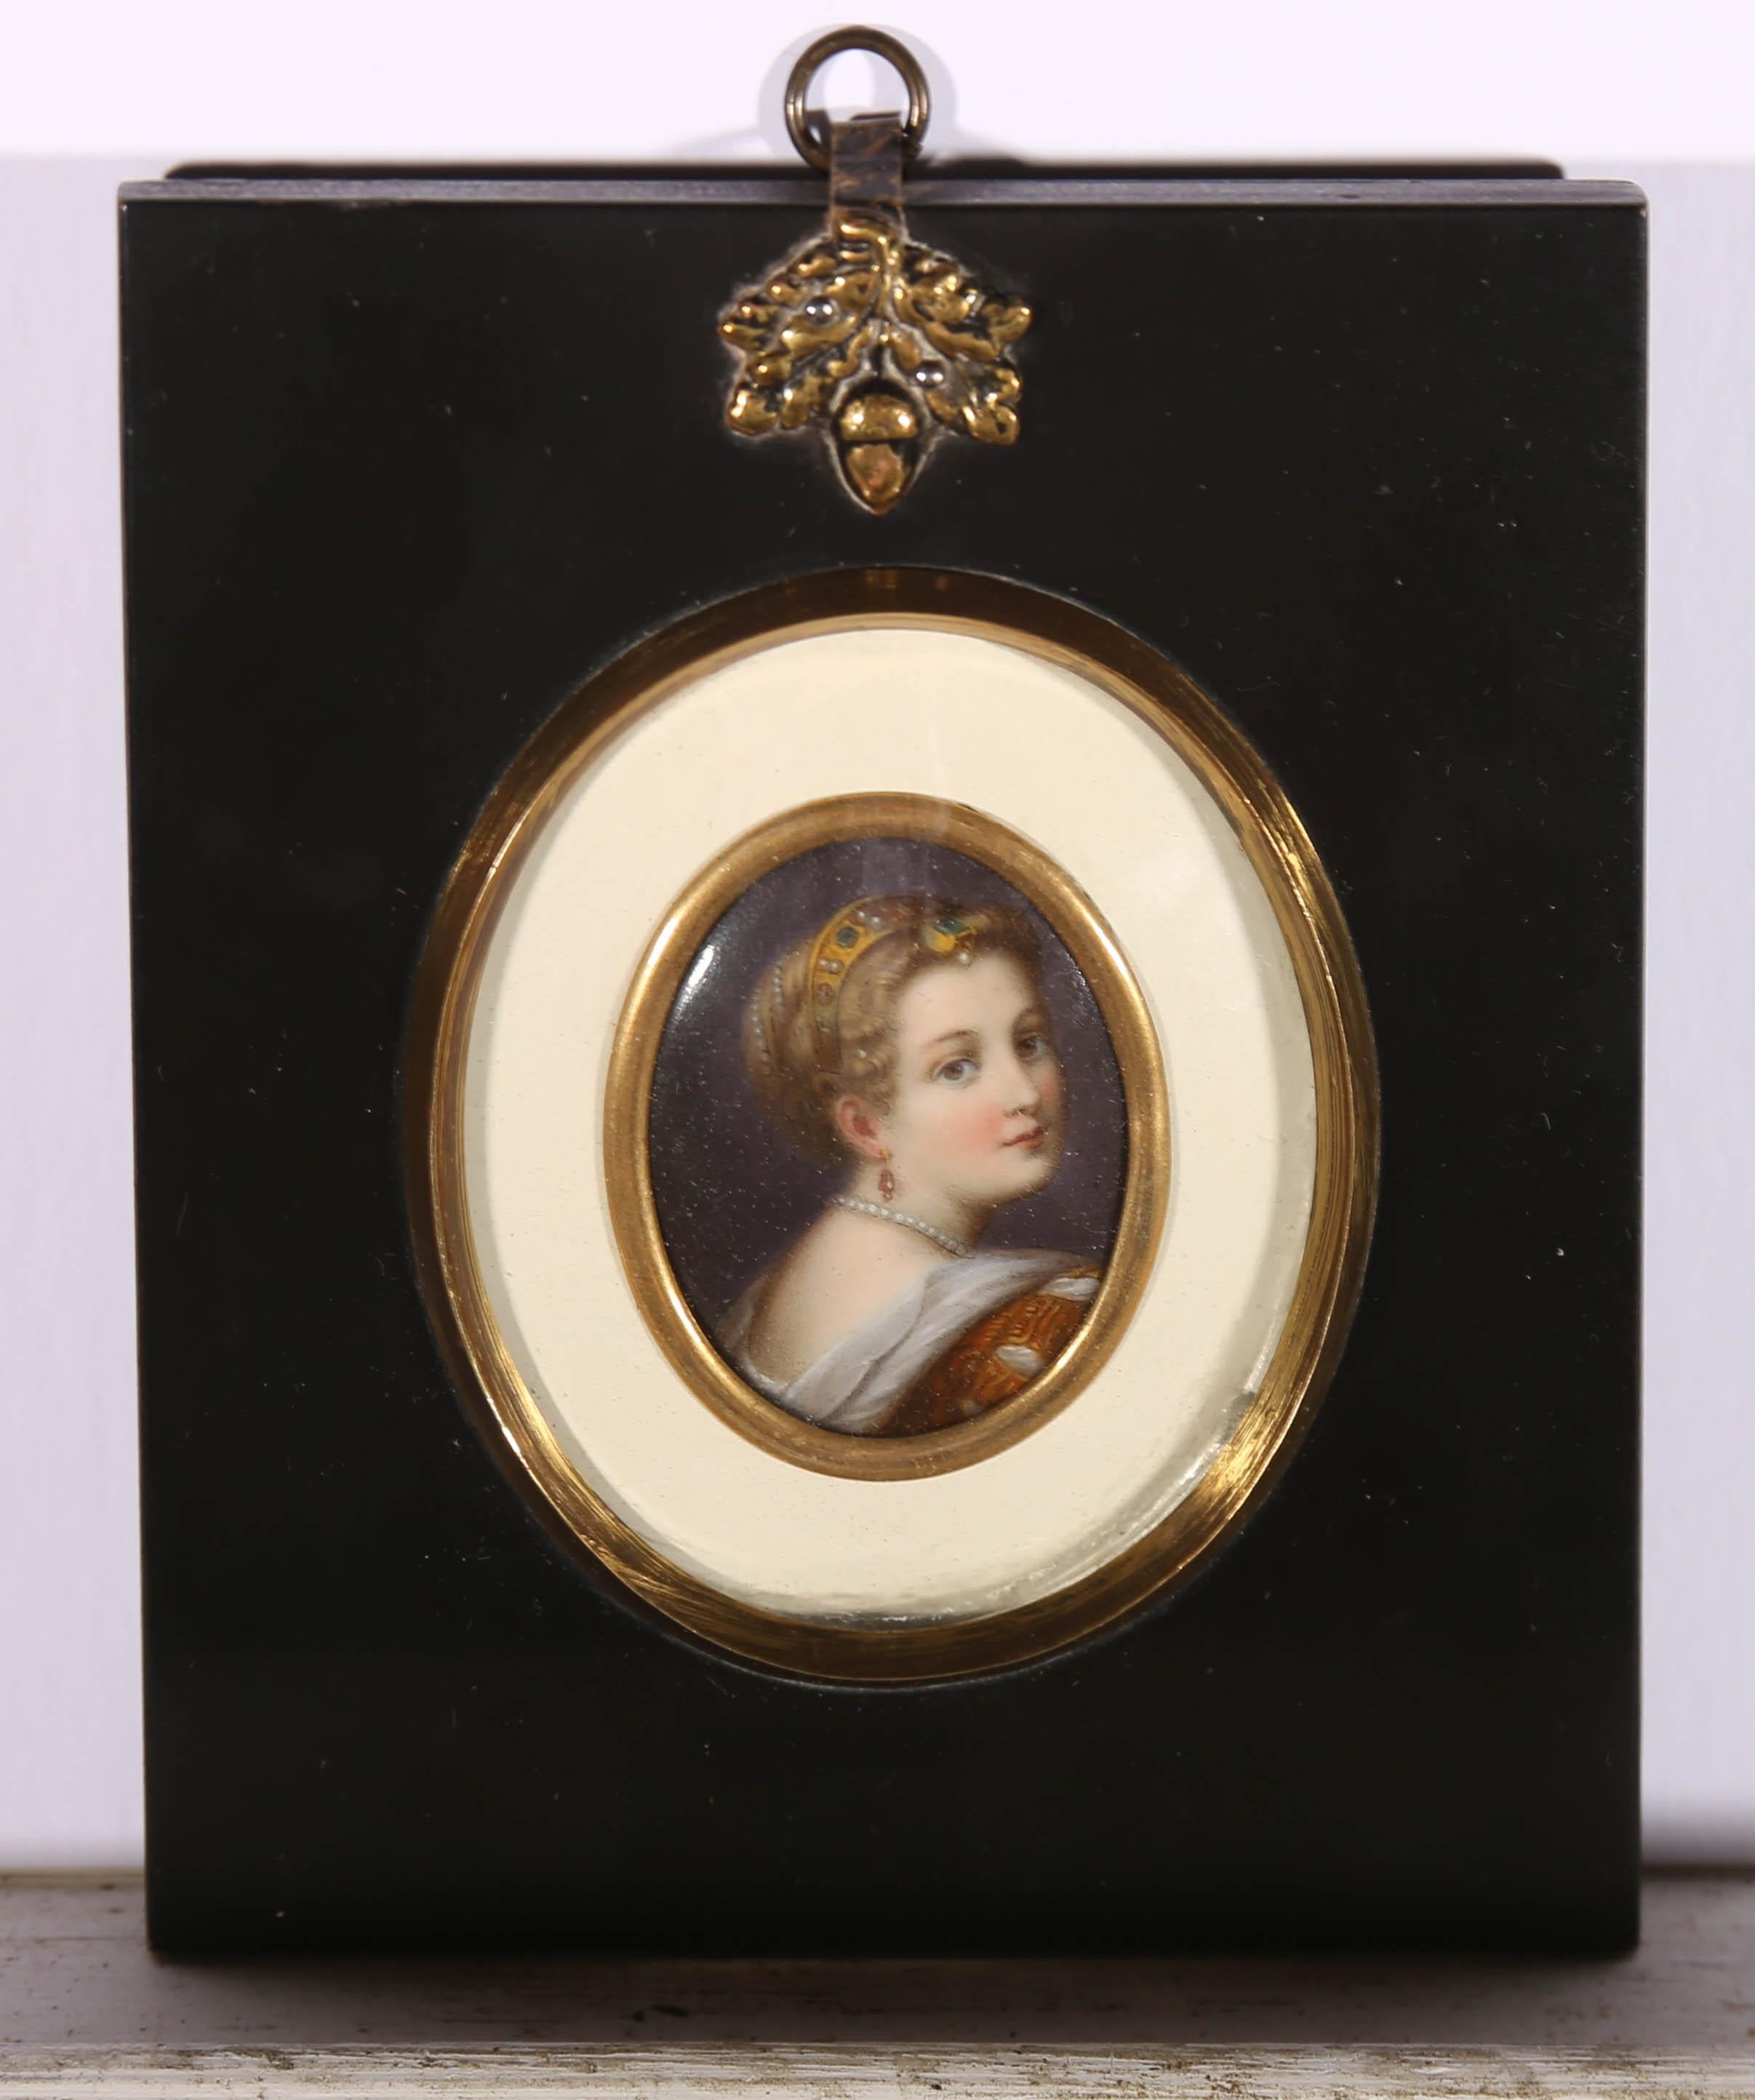 A fine enamel on porcelain, oval miniature of a titanesque female wearing a jewel set gold hair ornament, earrings and pearl necklace. Very well presented in an original papier mache frame with a brass acorn hanger and original domed glazing. On